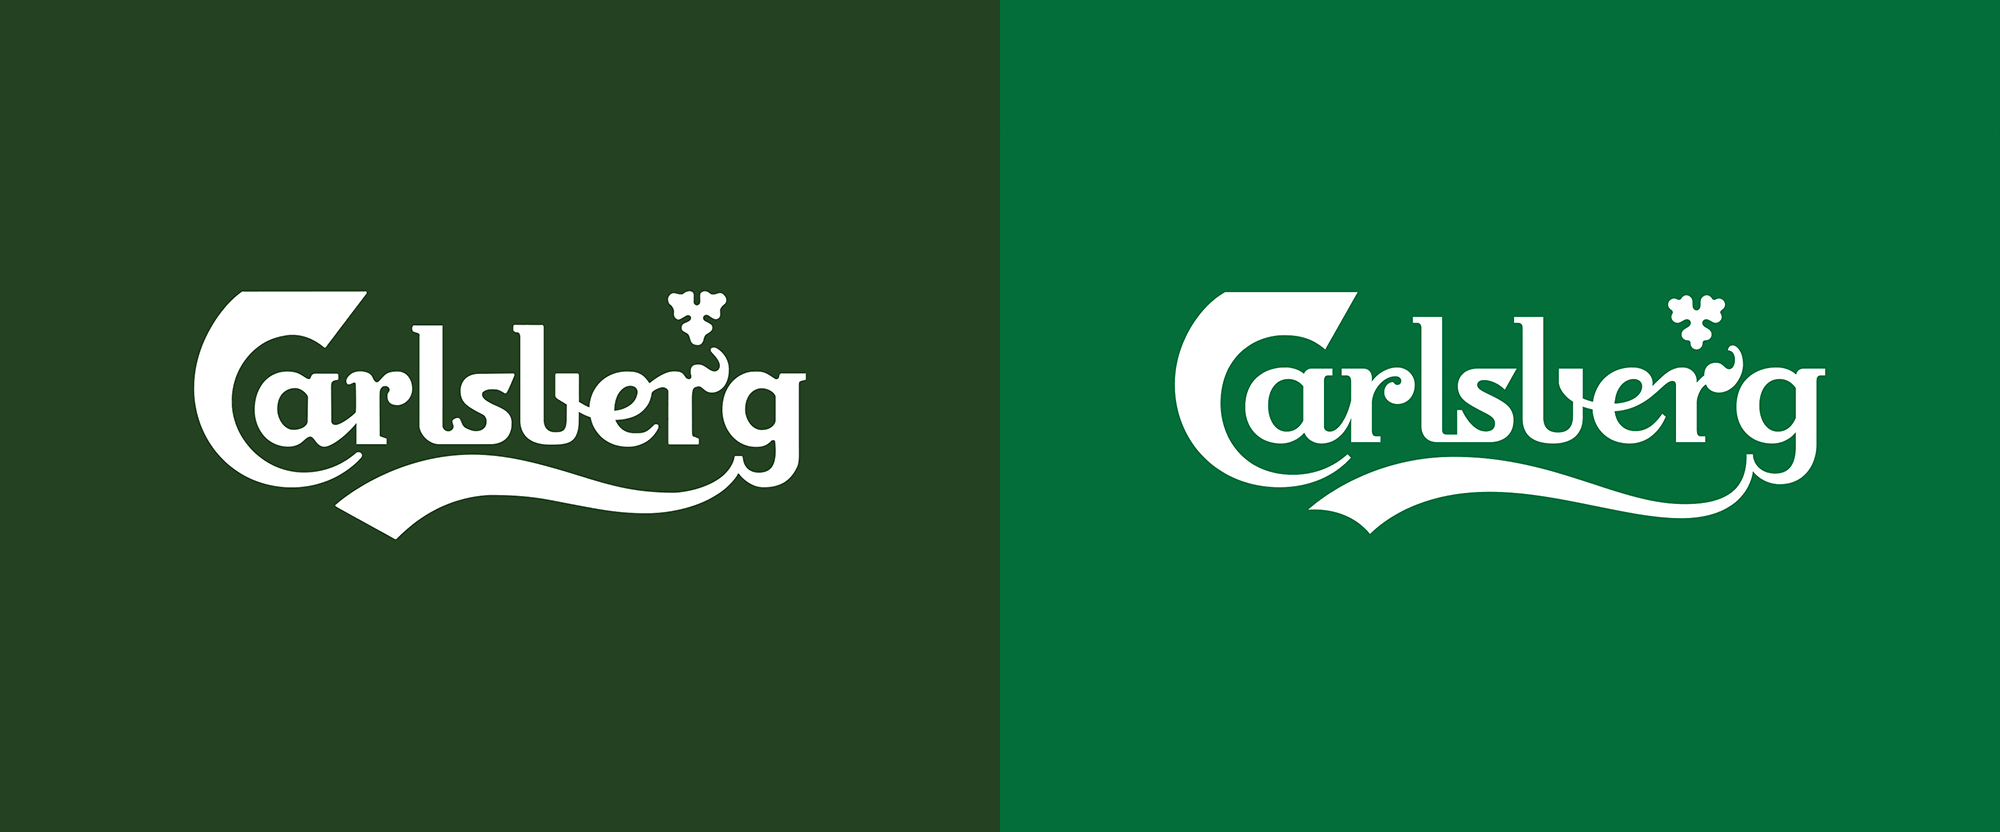 Beer Logo - Brand New: New Logo and Packaging for Carlsberg by Taxi Studio